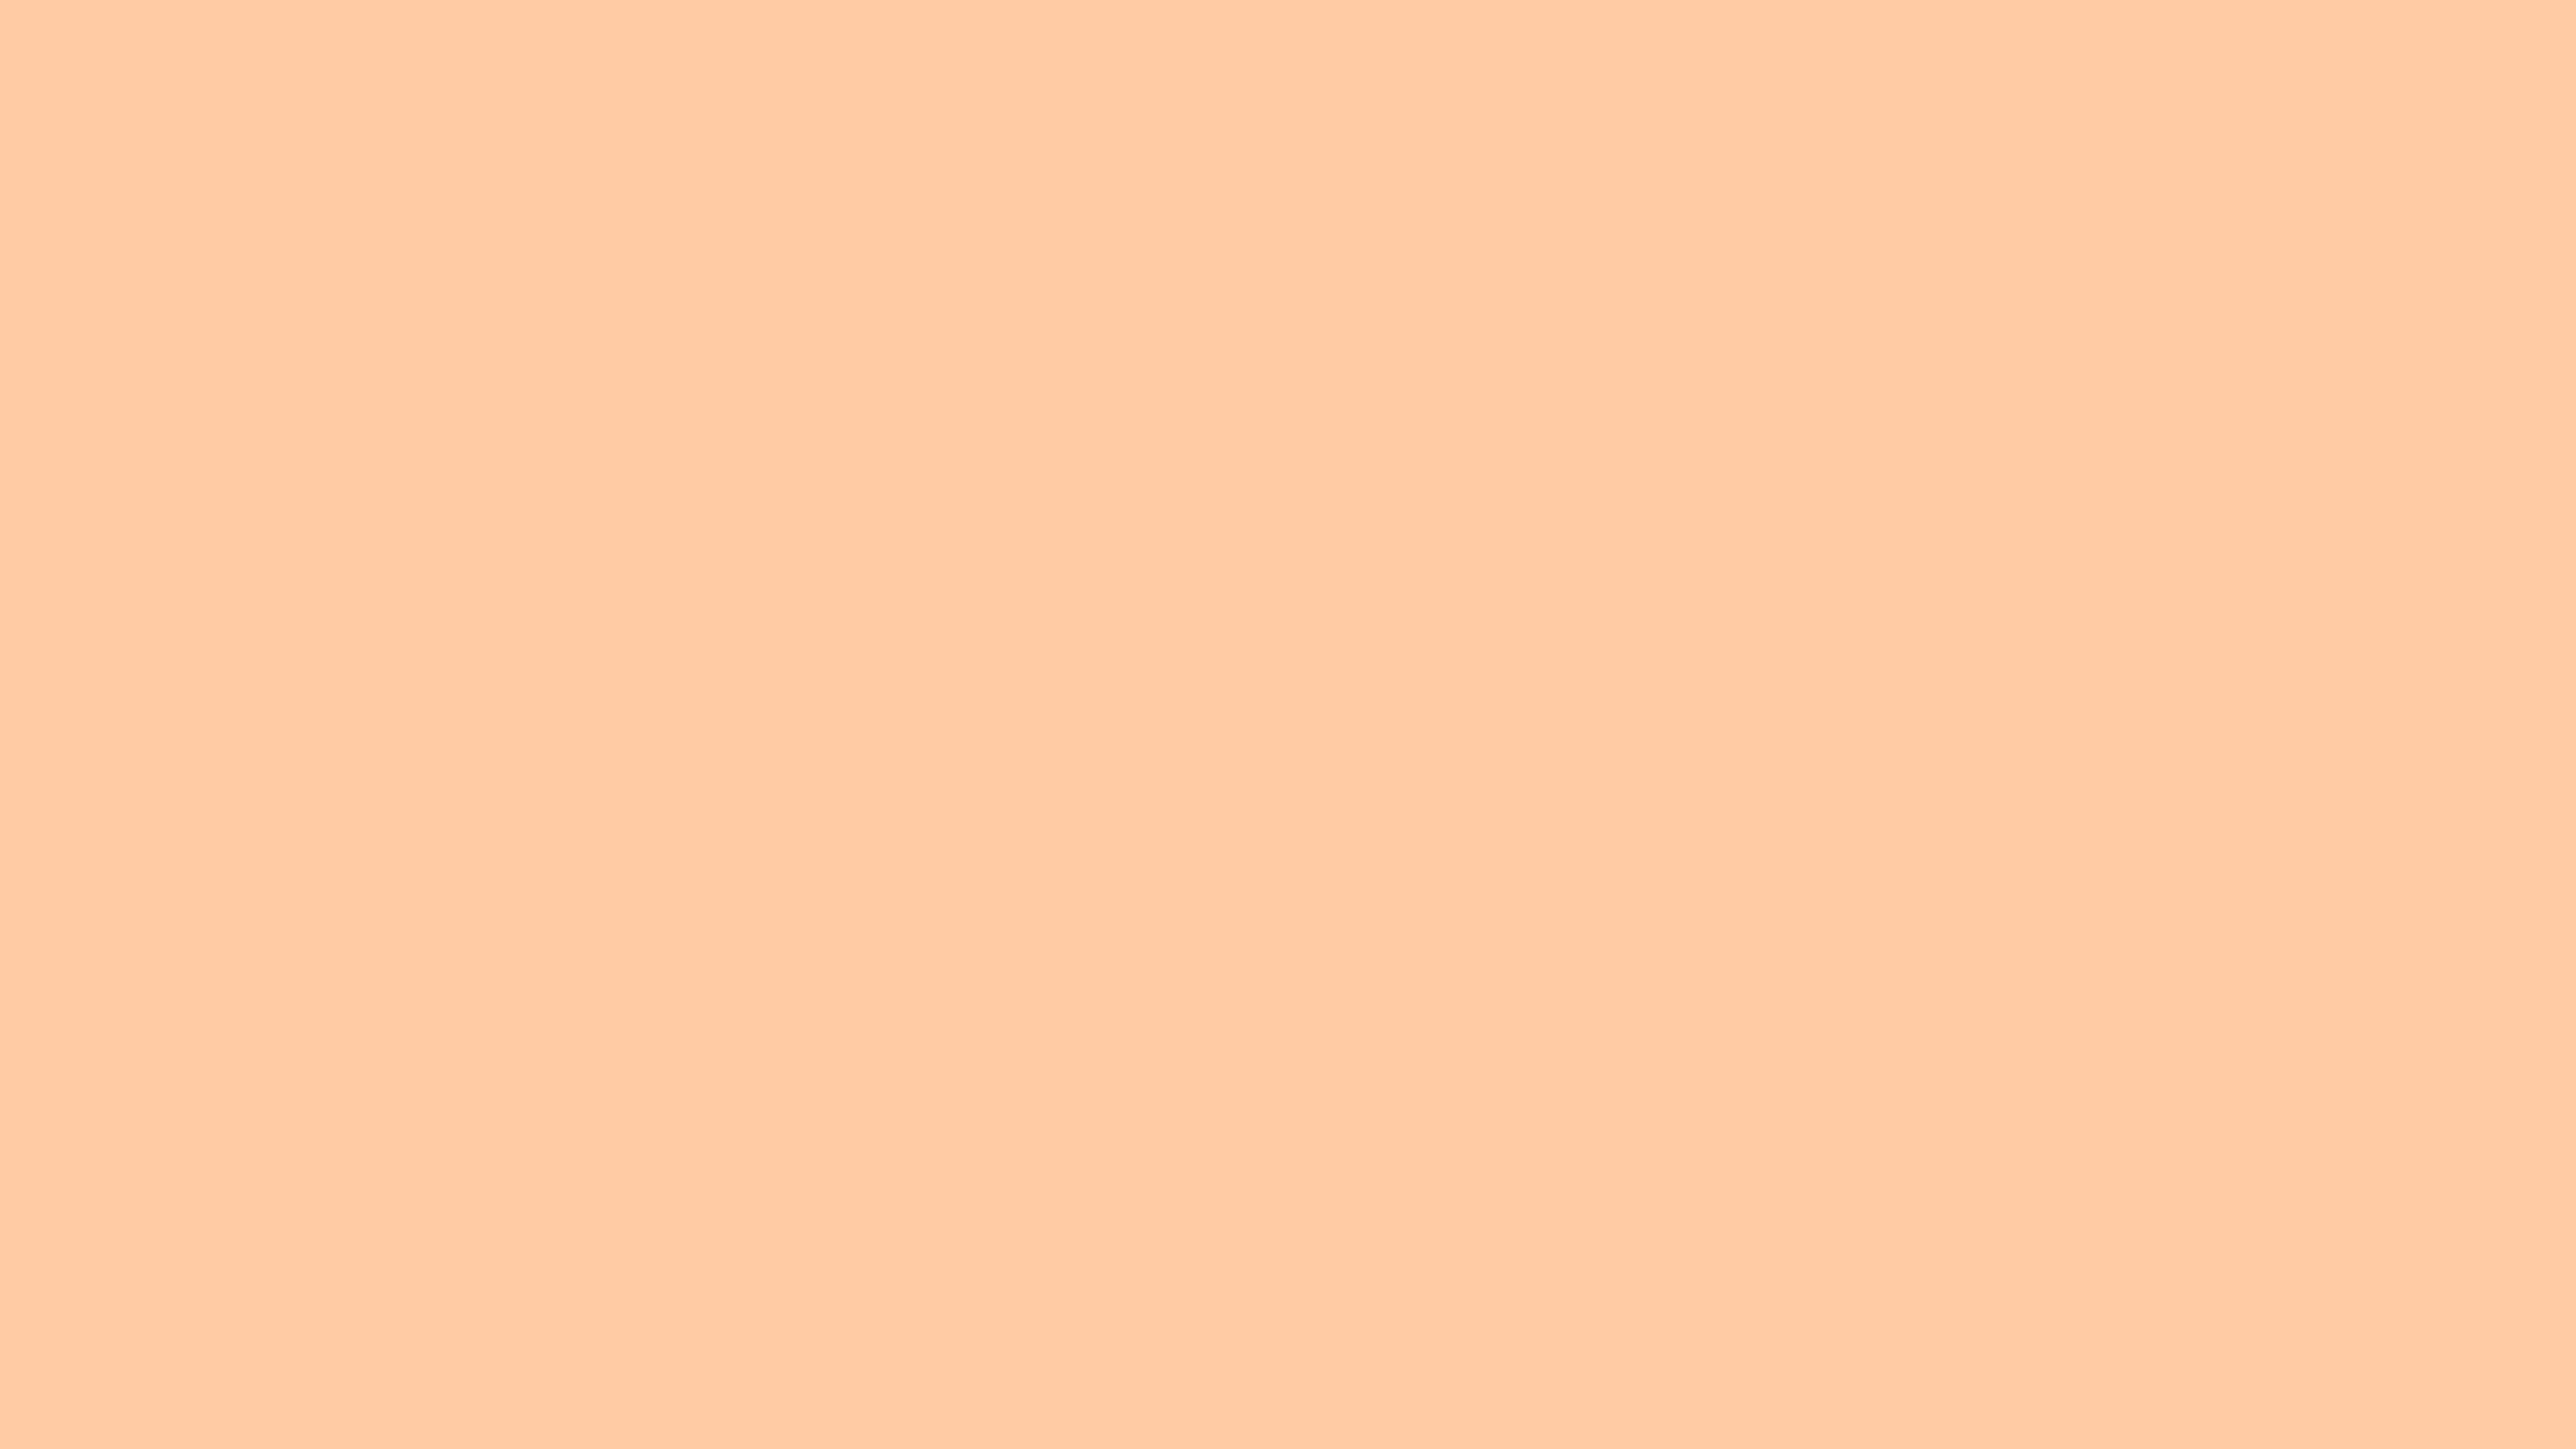 4096x2304 Deep Peach Solid Color Background